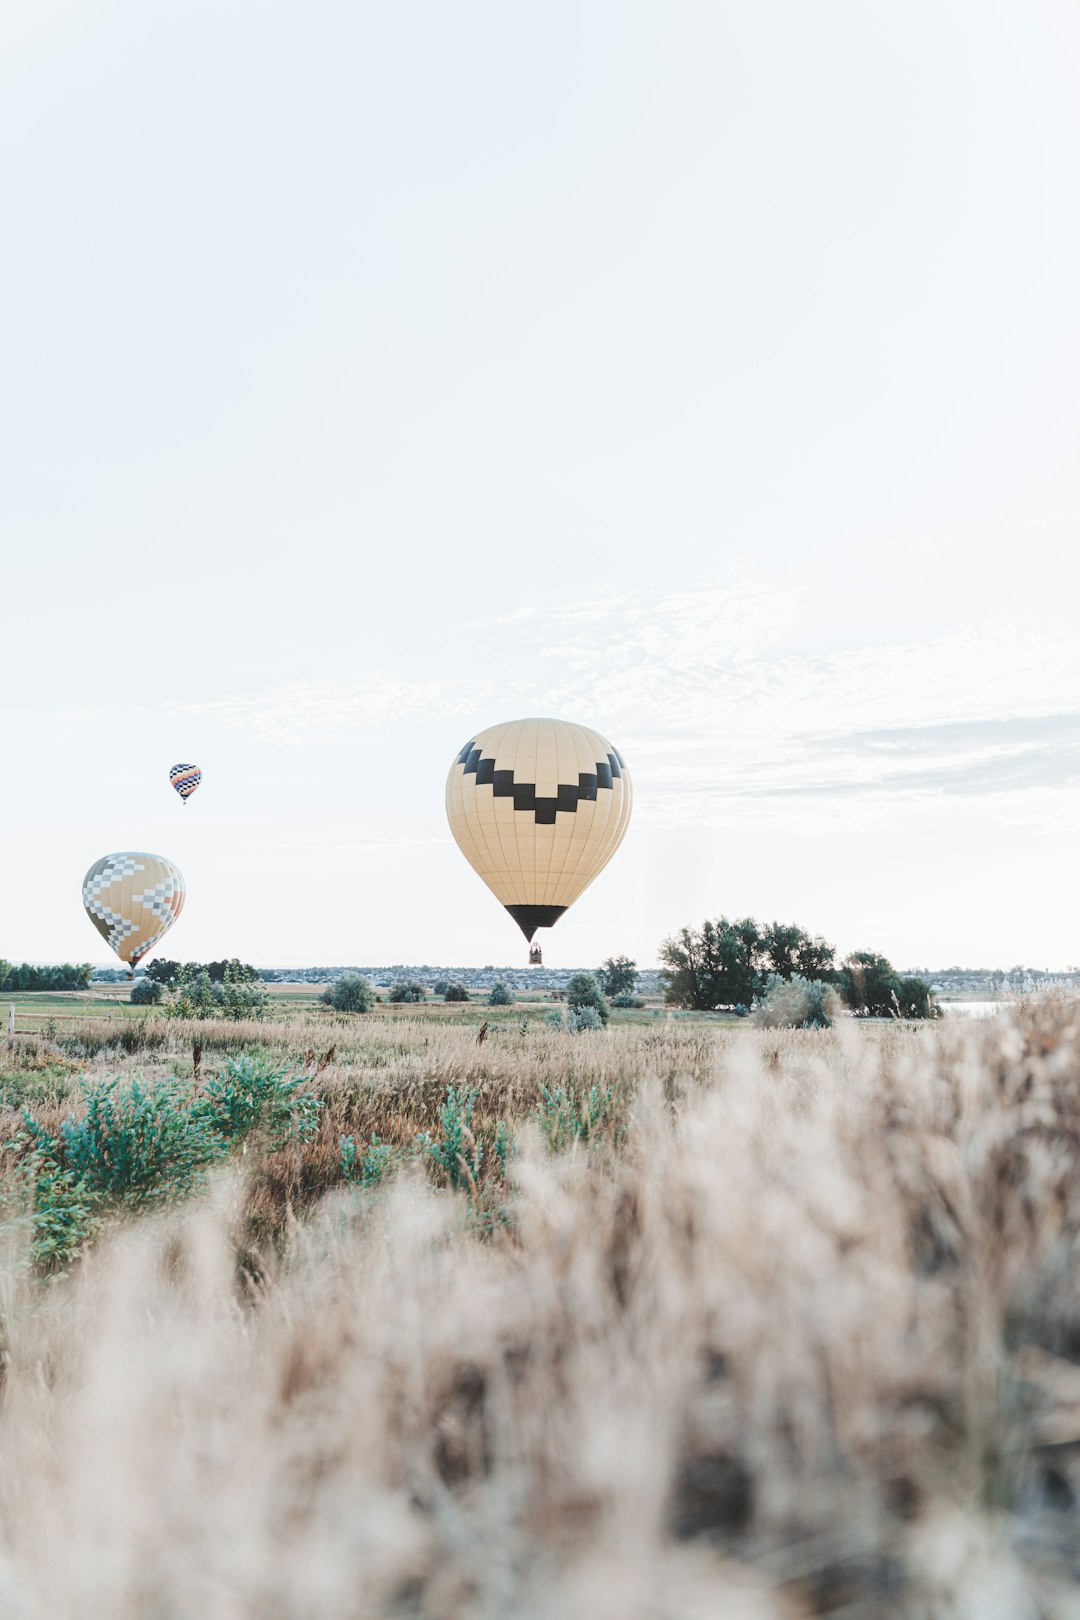 hot air balloons flying over green grass field during daytime